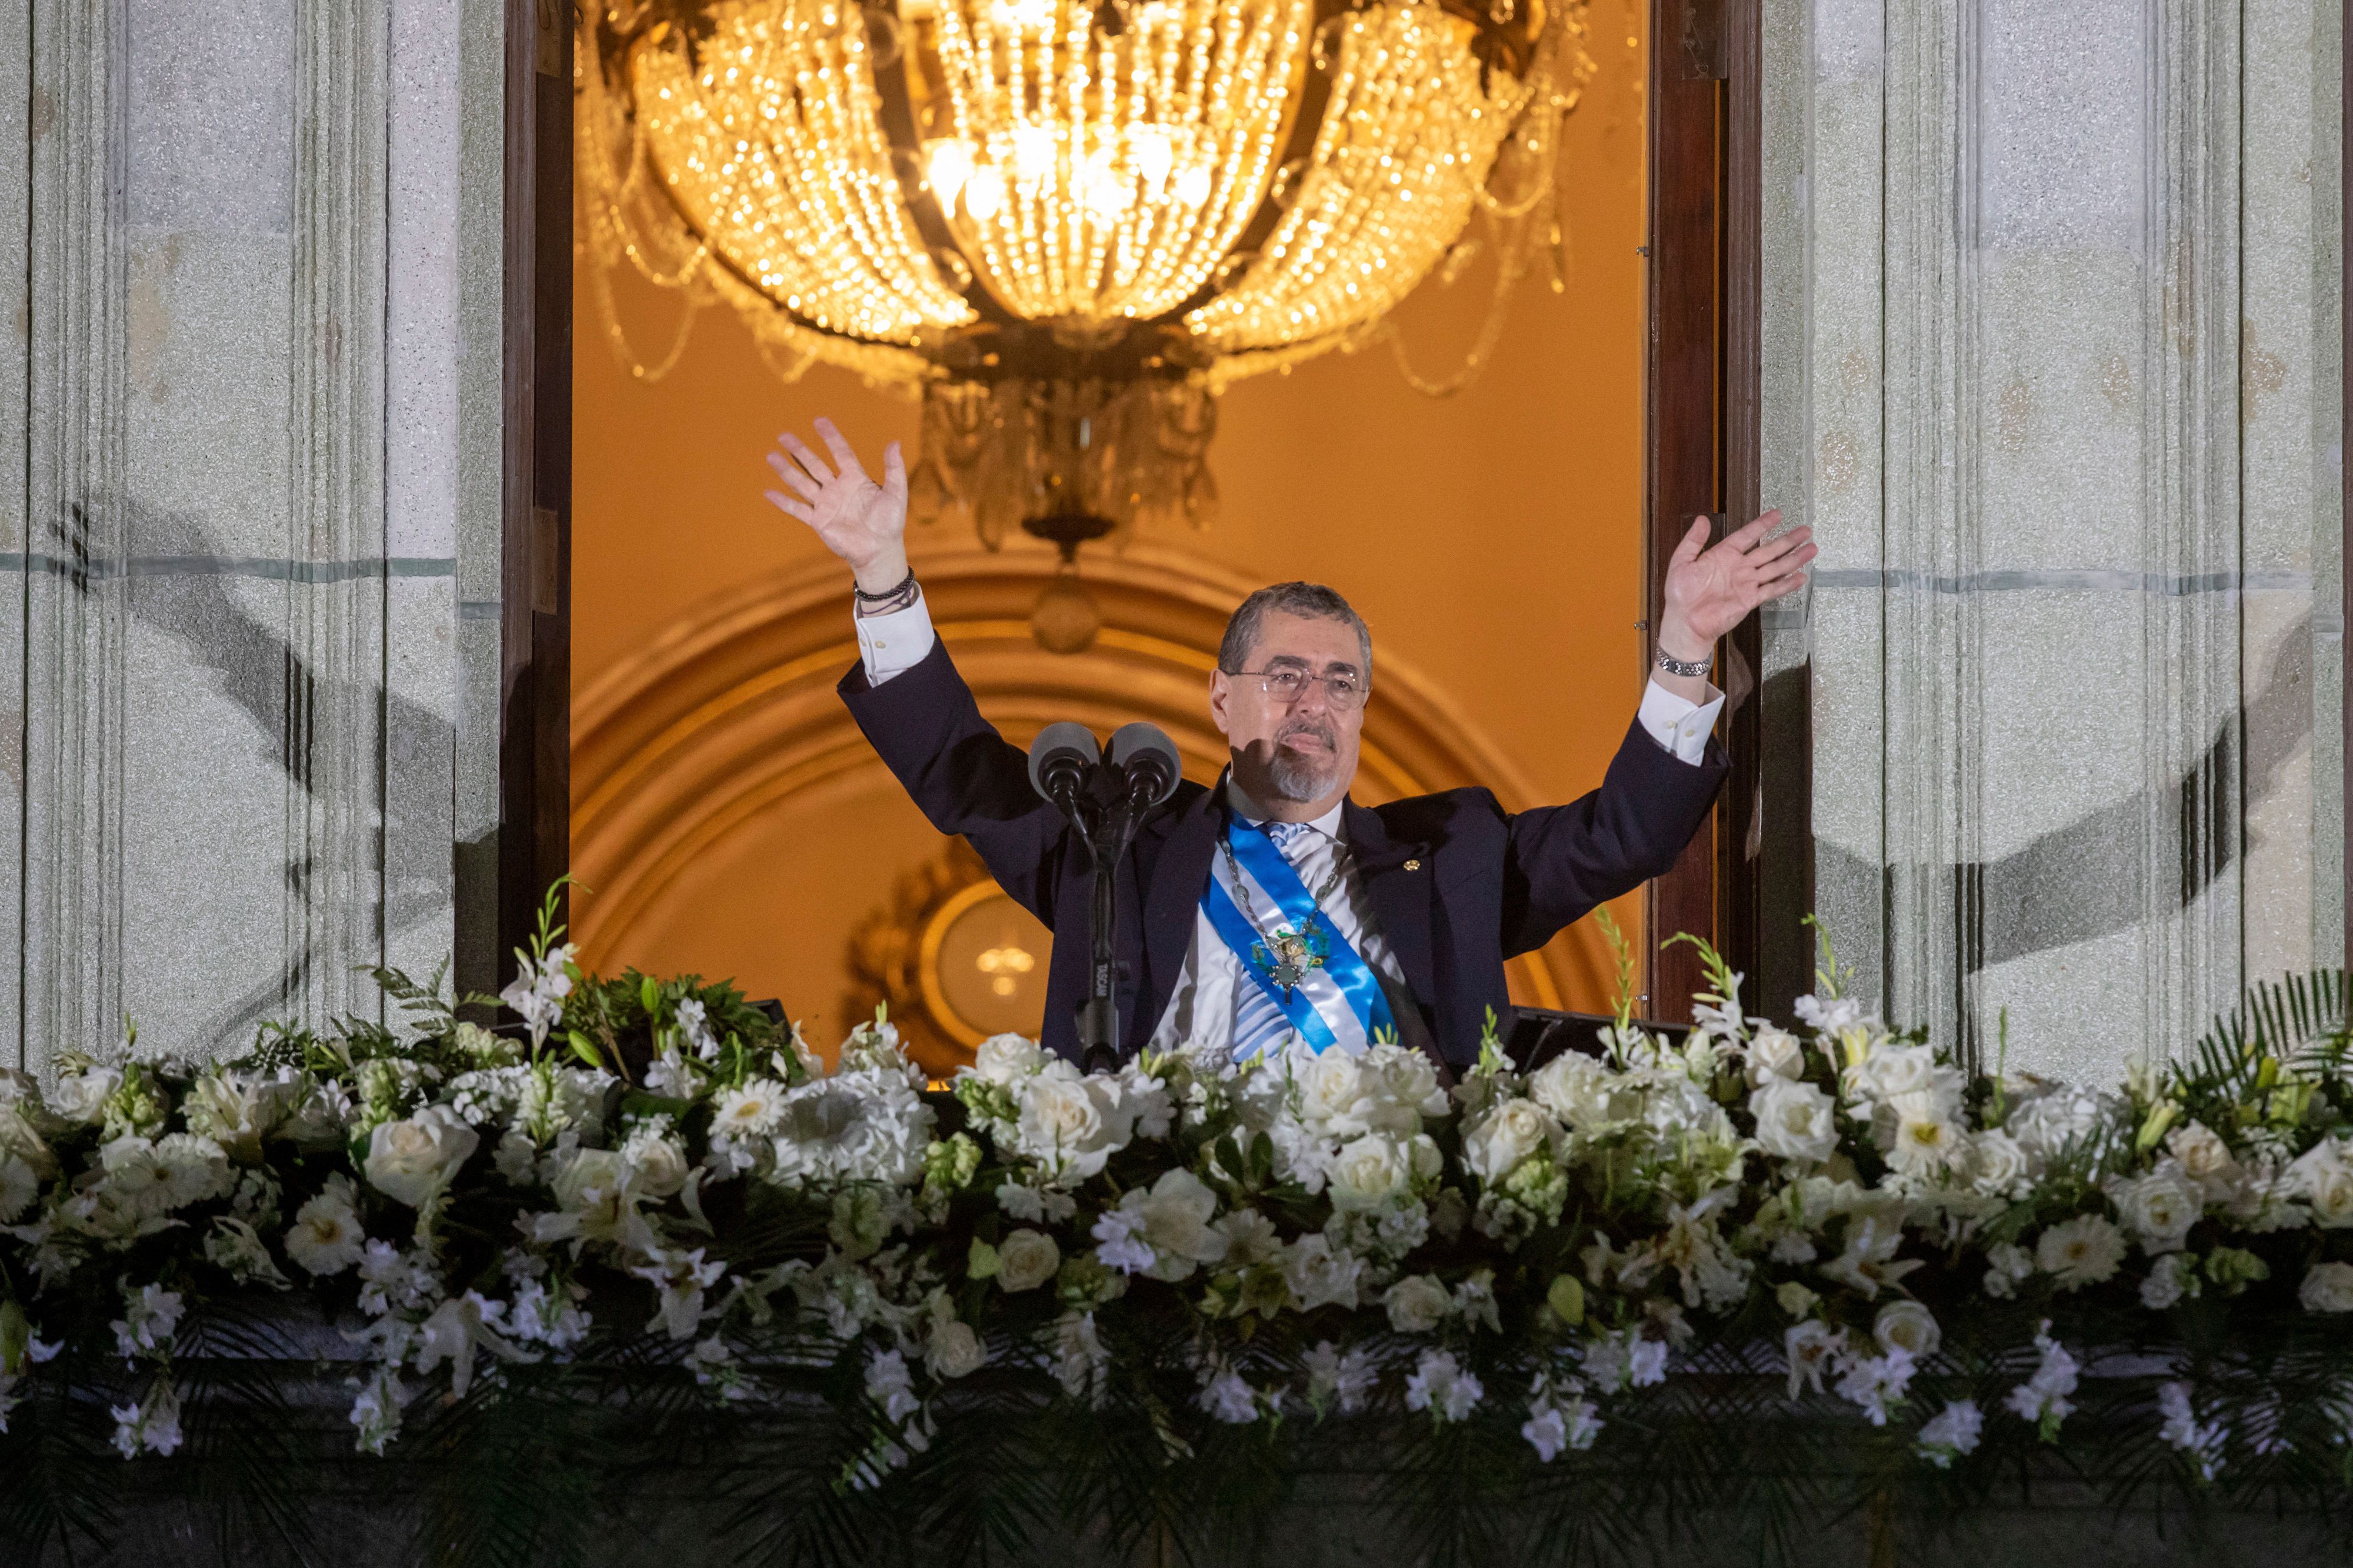 Guatemalan President Bernardo Arévalo raises both arms in the air while outside a palace after being sworn in. It is nighttime. There are rows of white flowers in front of him. 